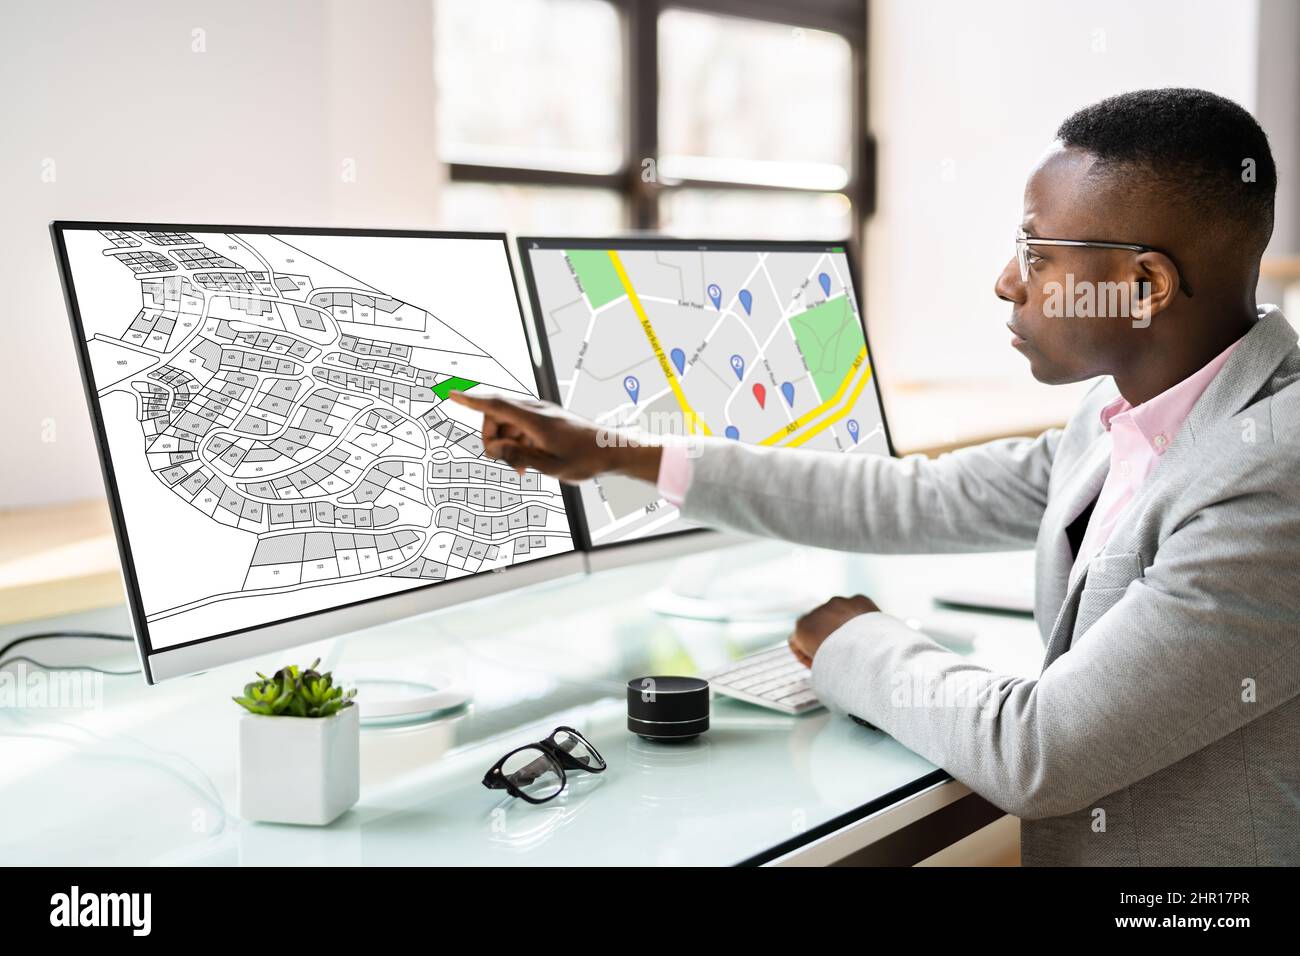 African American Using Cadastral Map On Tablet Computer Stock Photo